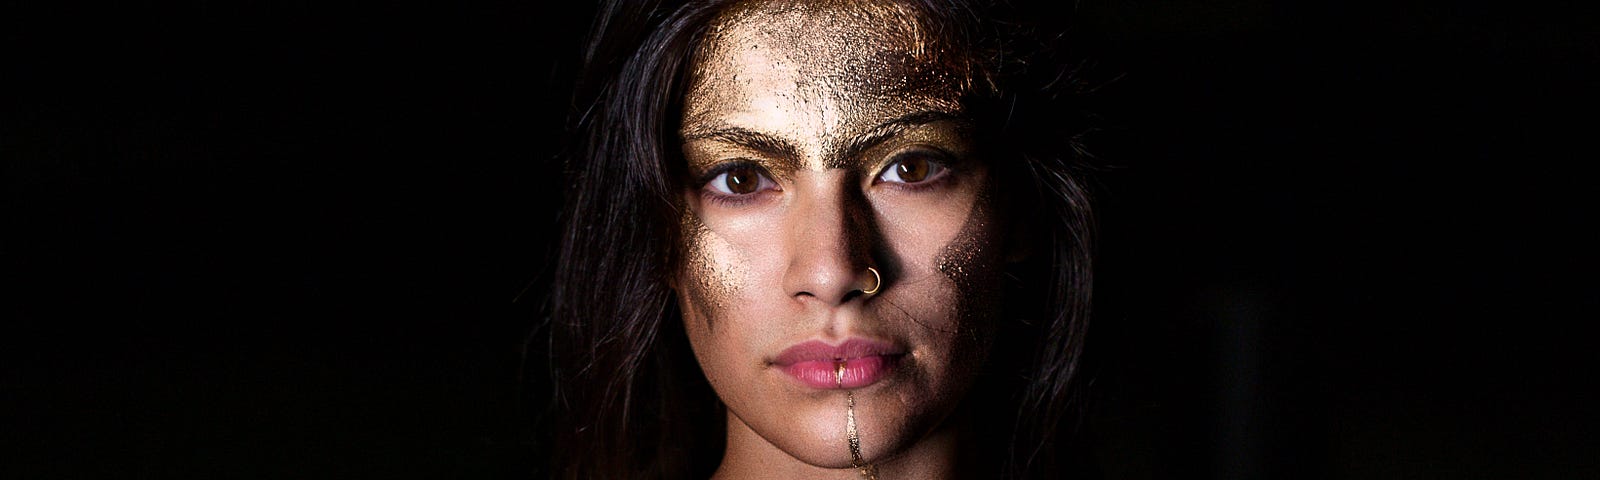 An image of a woman looking straight into the camera, and on her body she has golden glitter, accentuating her shoulders as if she’s wearing a top.